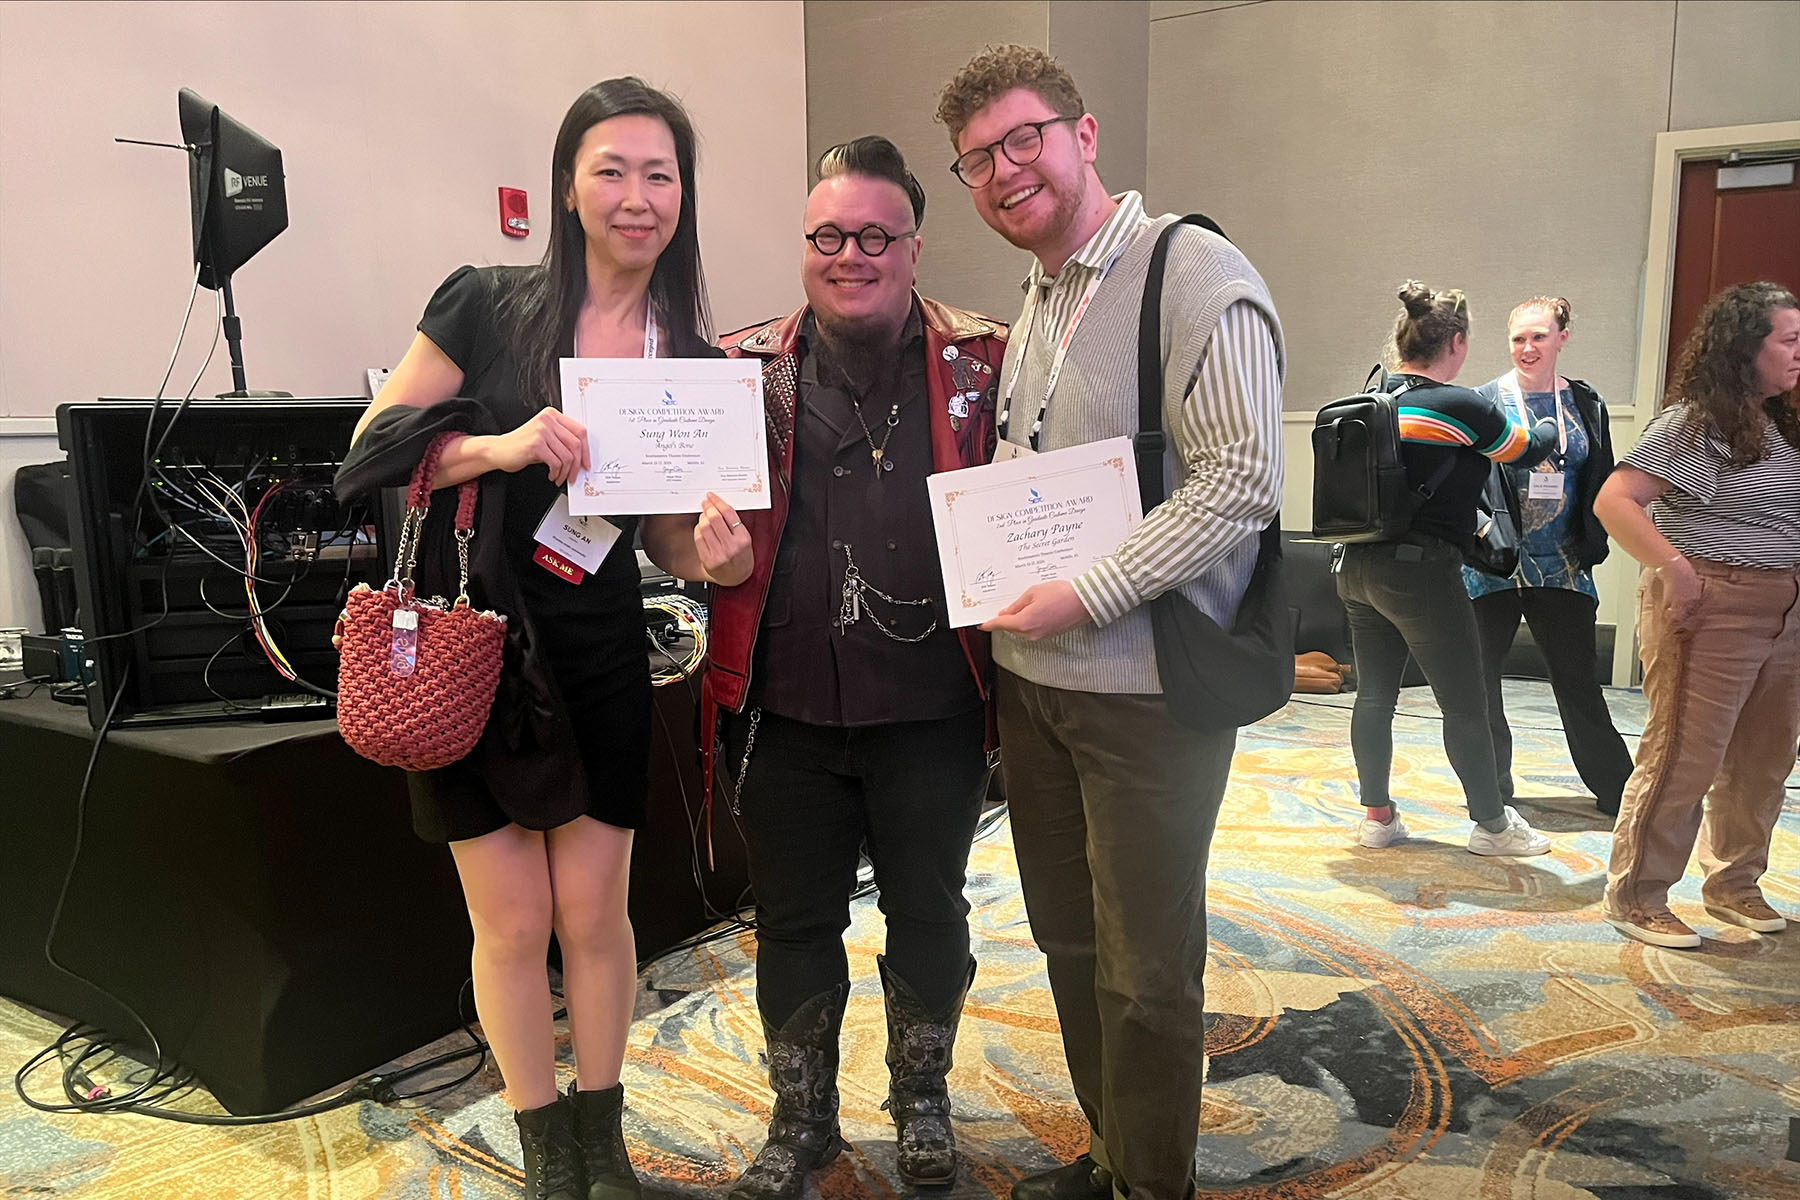 Sungwon An (left) and Zachary Payne (right) pose with costume designer Erik Reagan Teague, who served at the convention’s keynote speaker and judged the design competition.